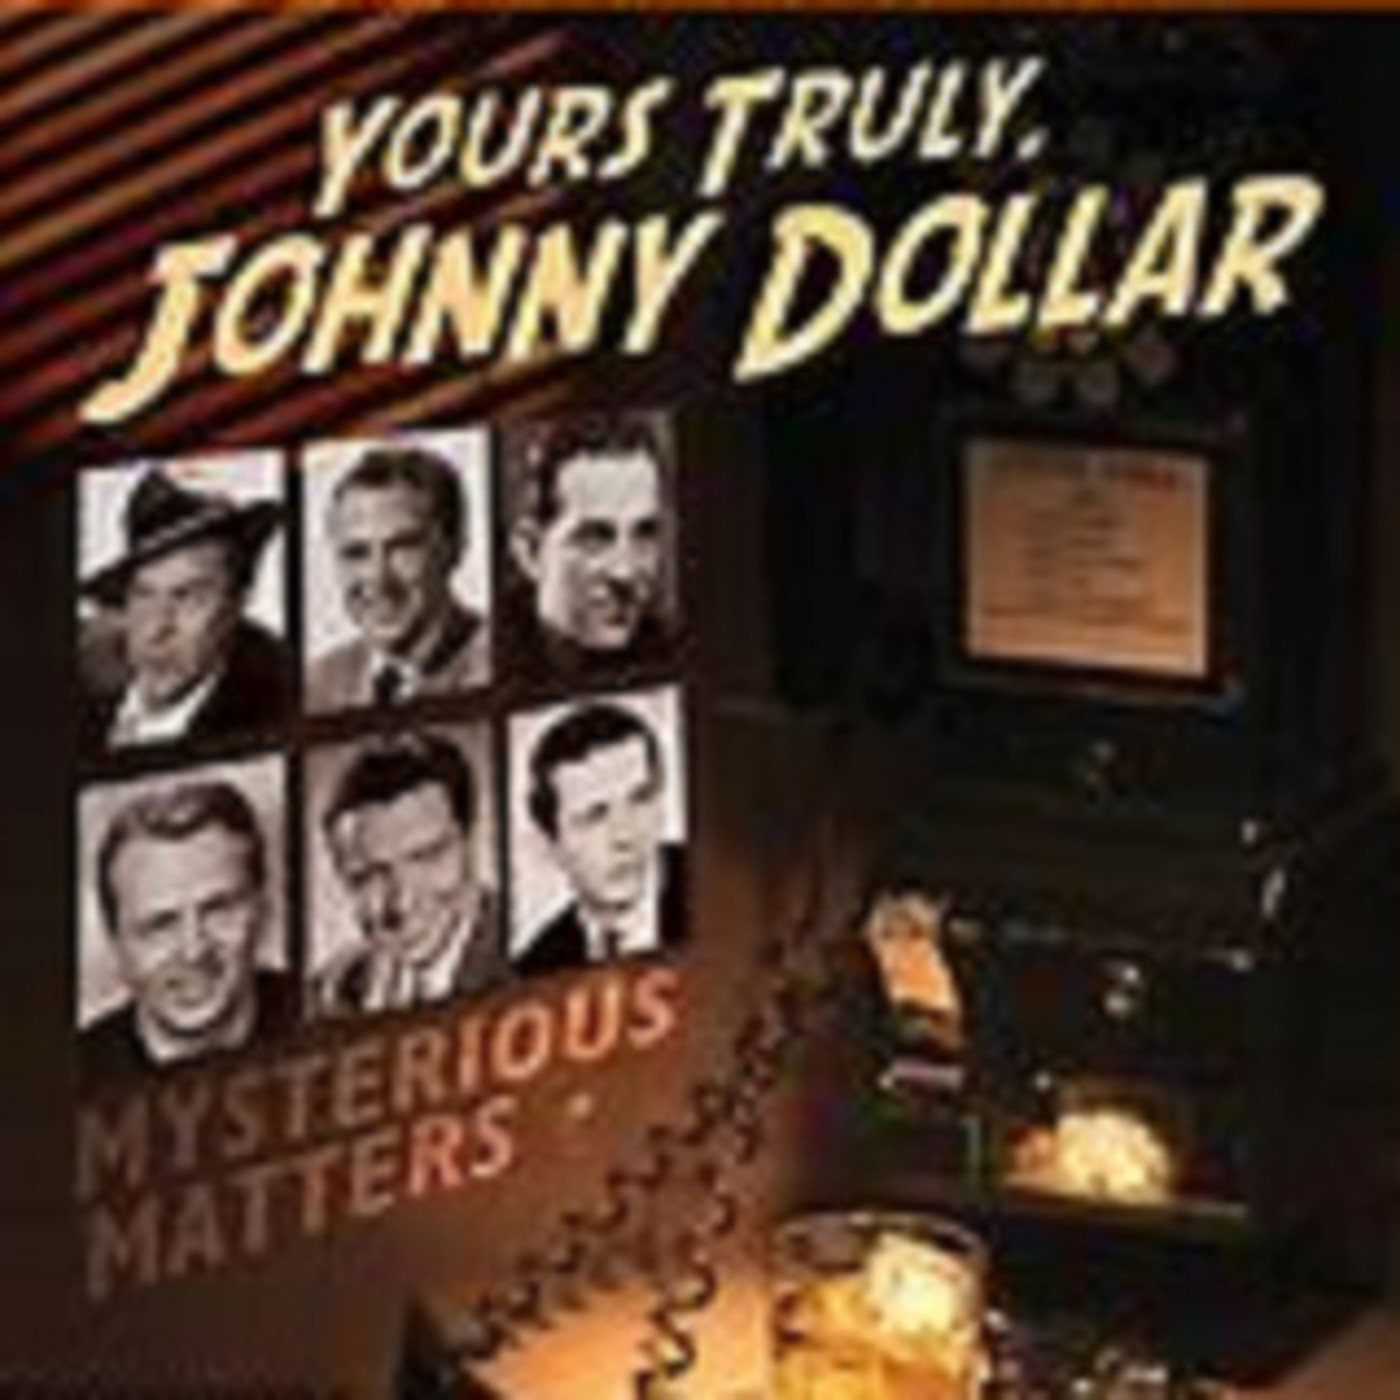 Yours Truly, Johnny Dollar - 062462, episode 797 - The Food of Death Matter